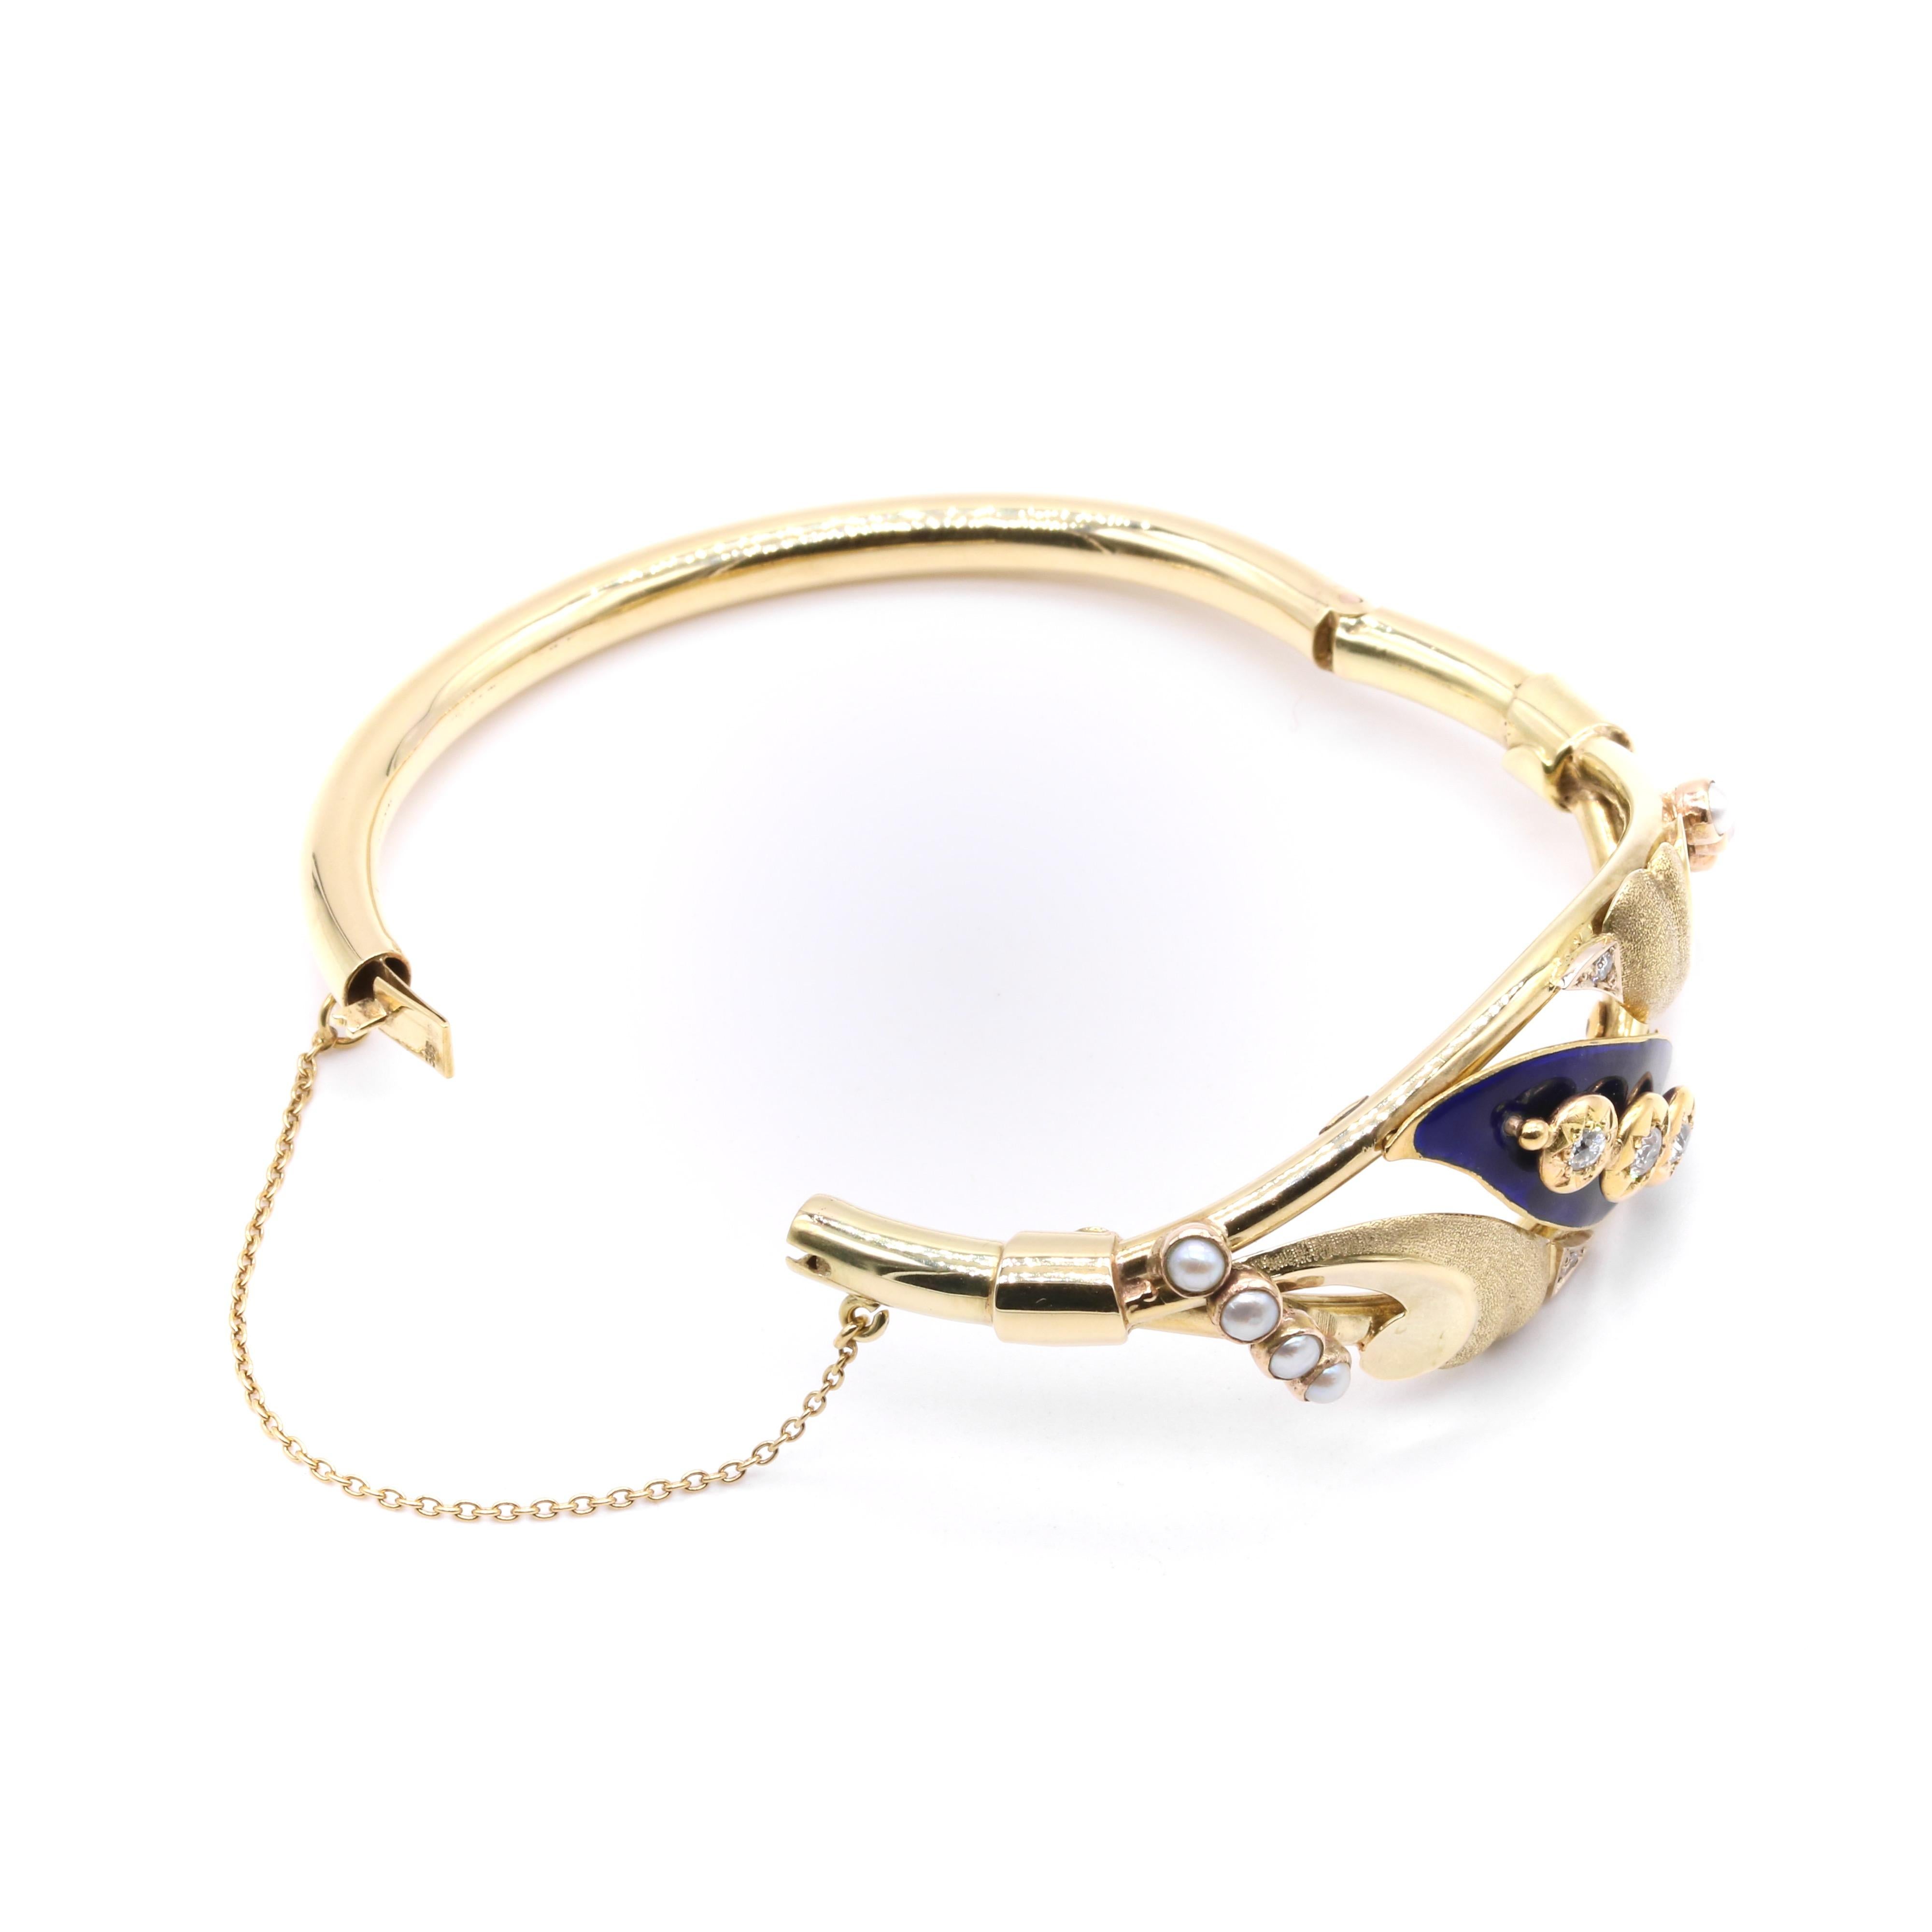 Antique Victorian 27g 14K Yellow Gold Diamond, Pearl and Blue Enamel Bracelet For Sale 1